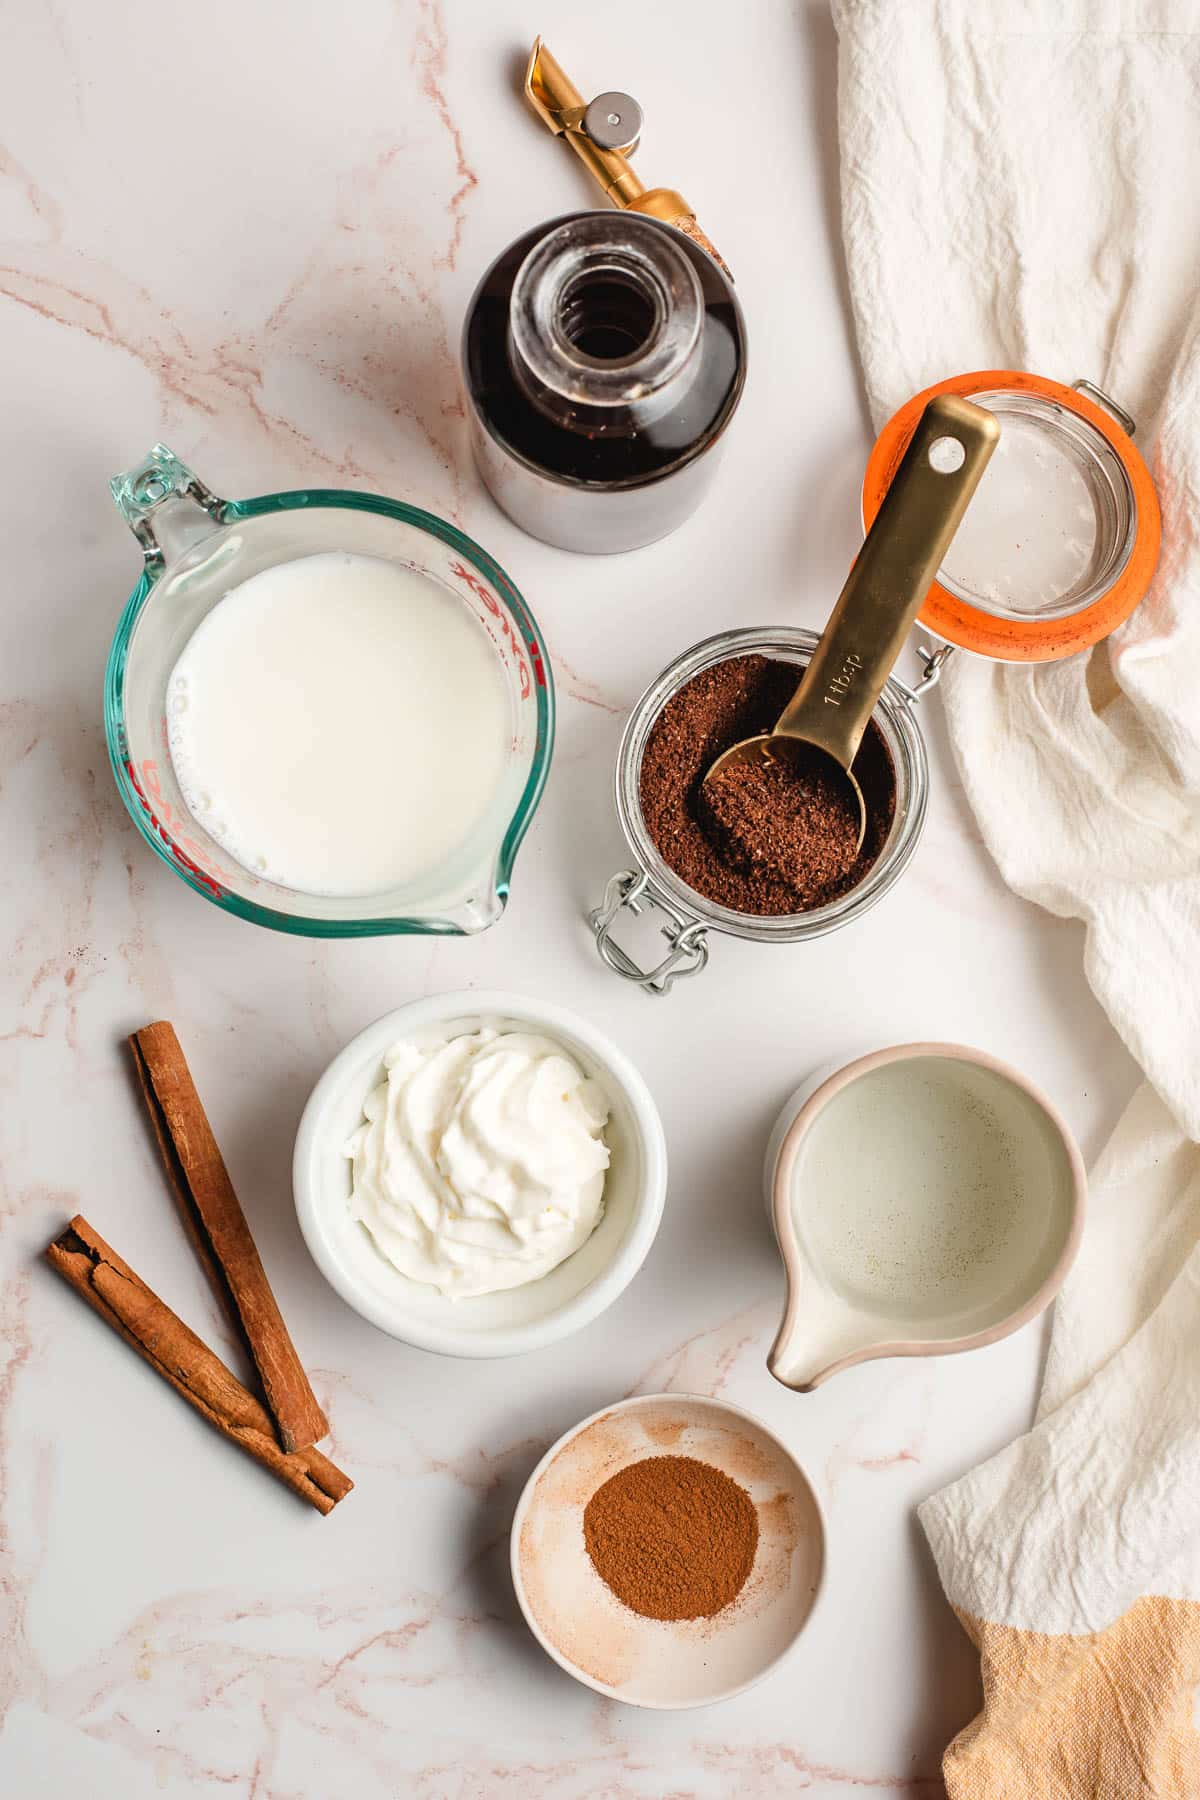 Cinnamon sticks, coffee, water, cinnamon, whipped cream, milk, and cinnamon syrup shown in prep bowls or glass measuring cups.